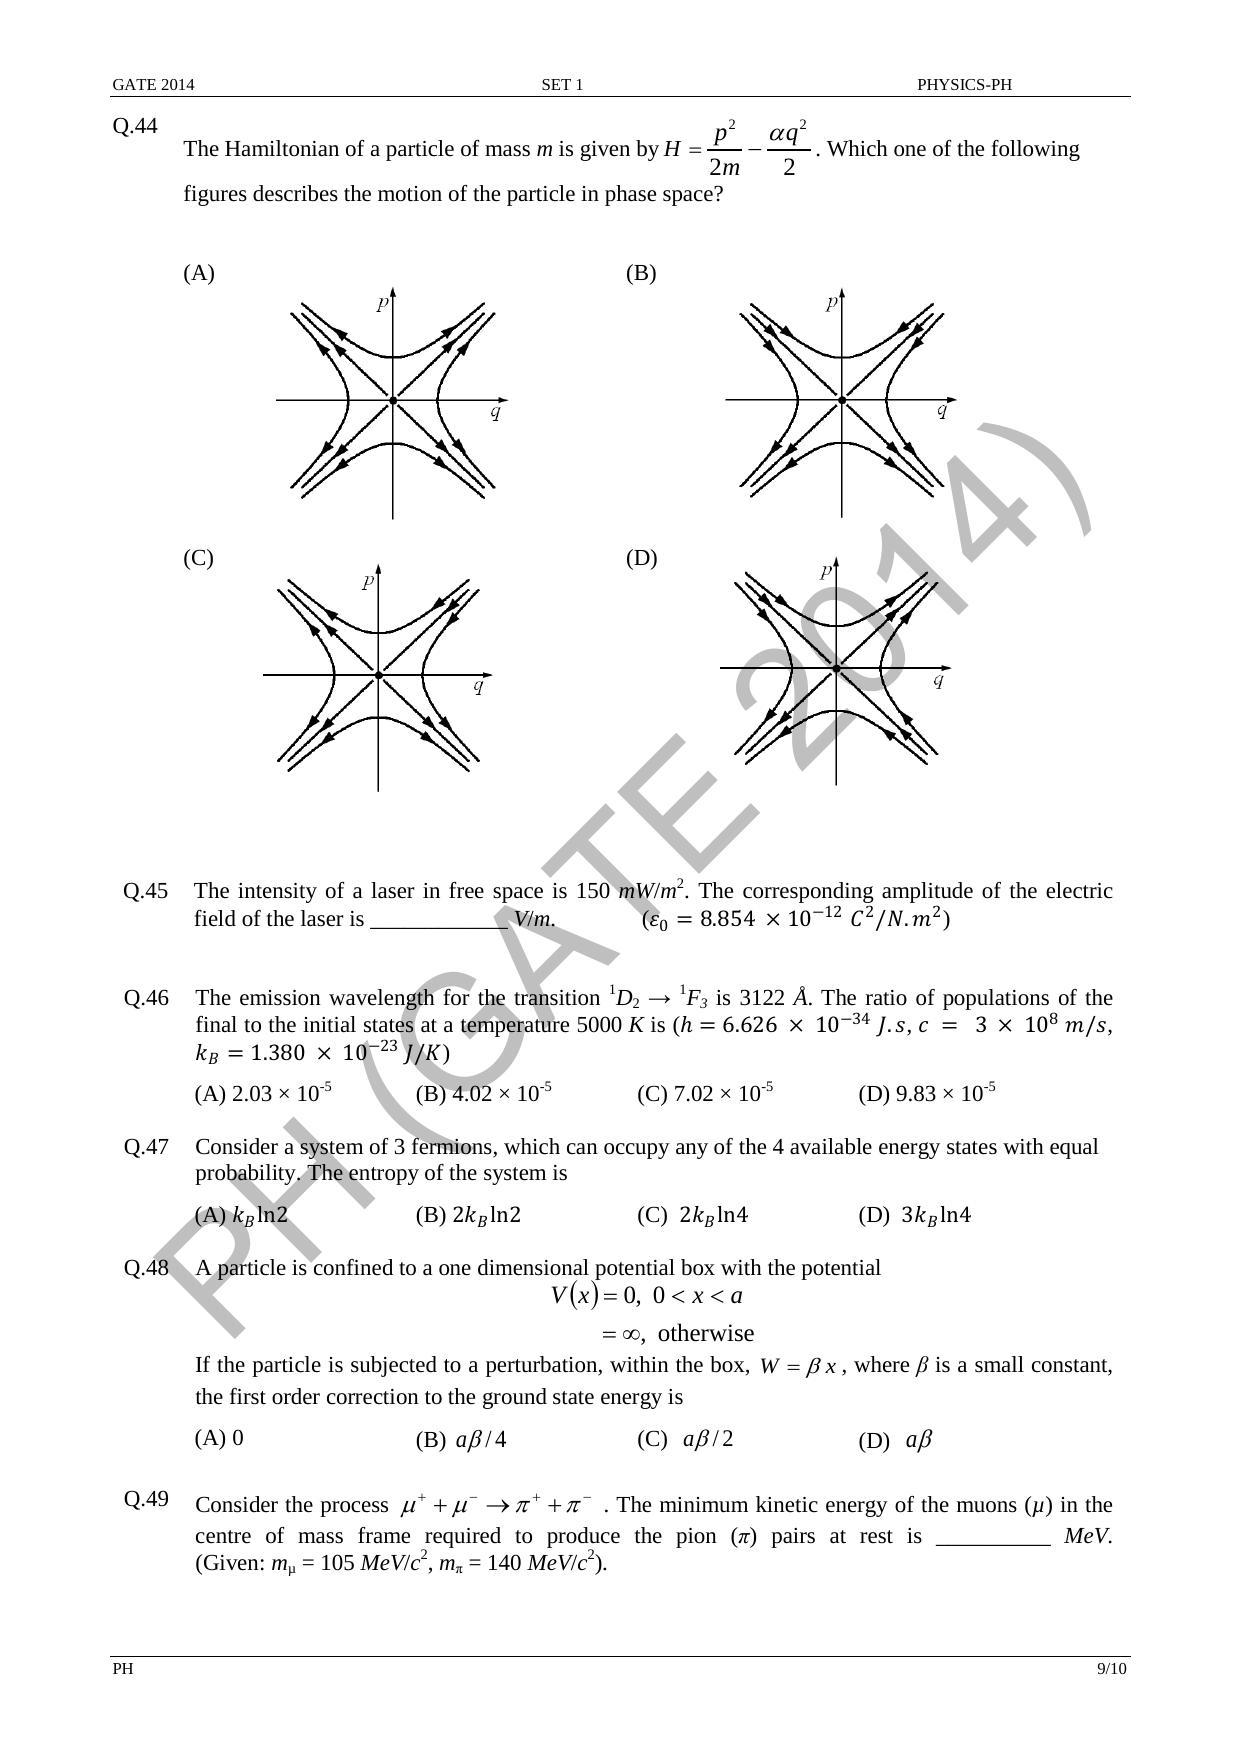 GATE 2014 Physics (PH) Question Paper with Answer Key - Page 16